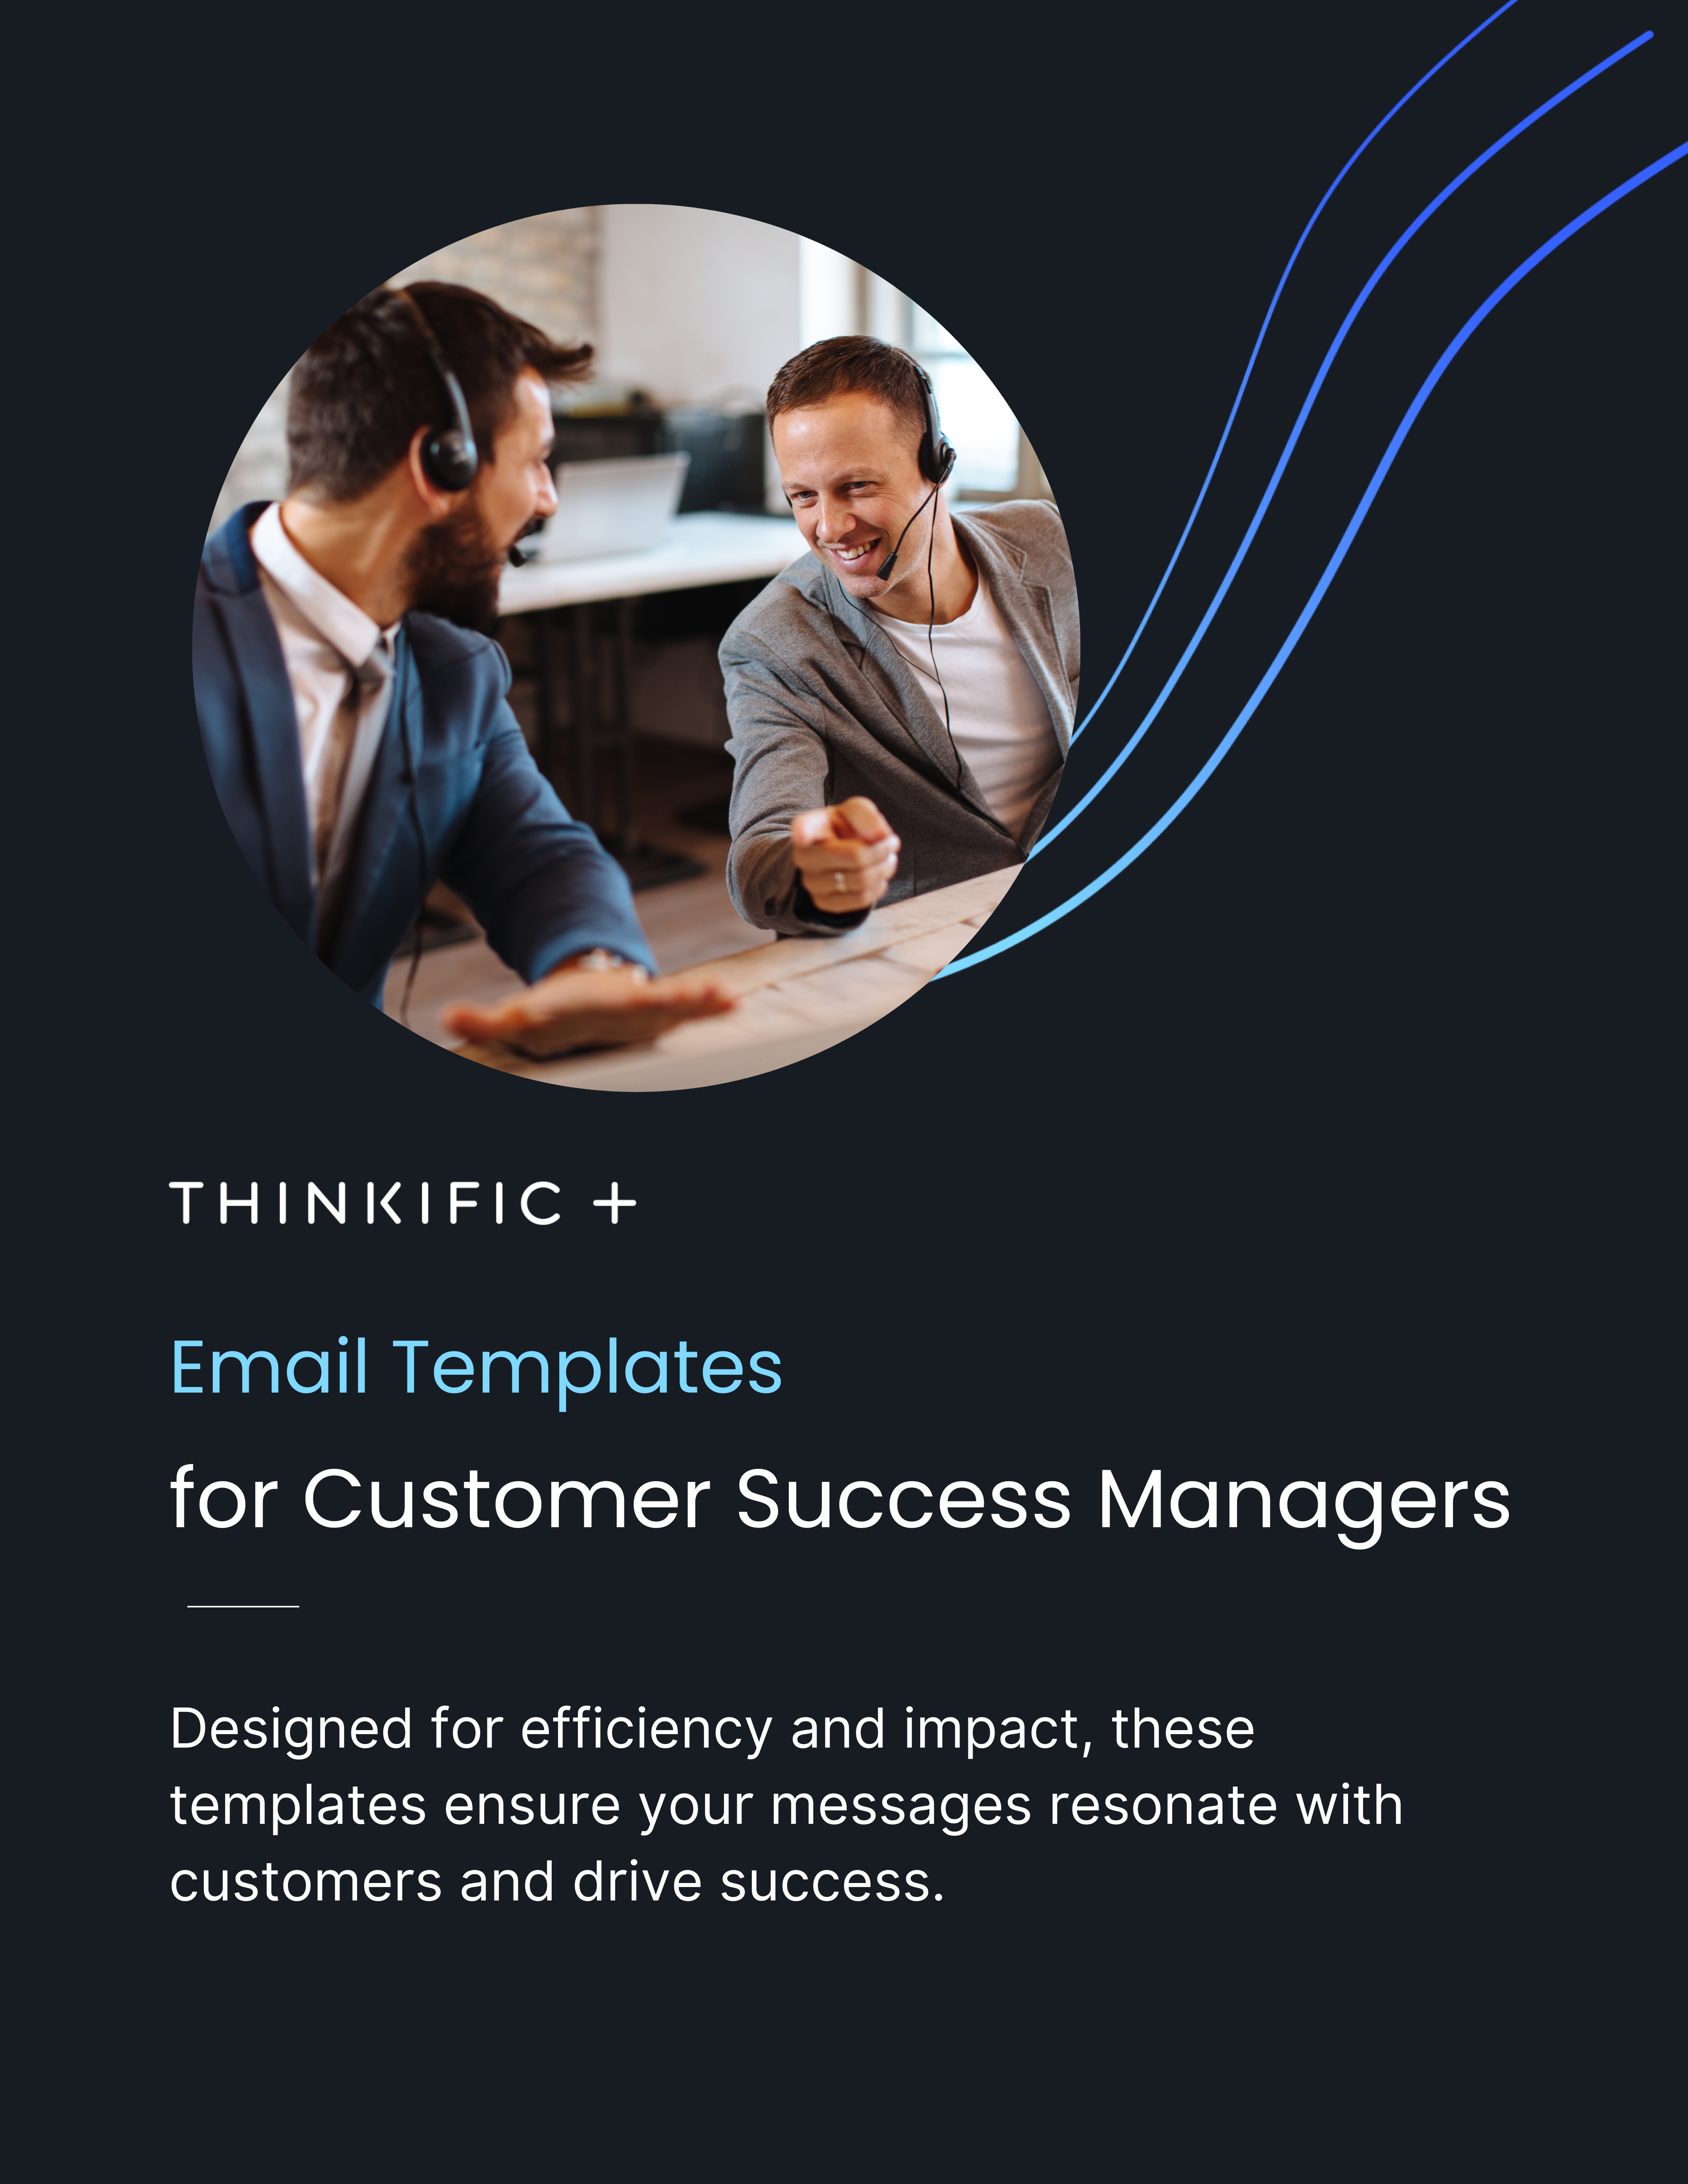 Free Email Templates for Customer Success Managers: Download Now